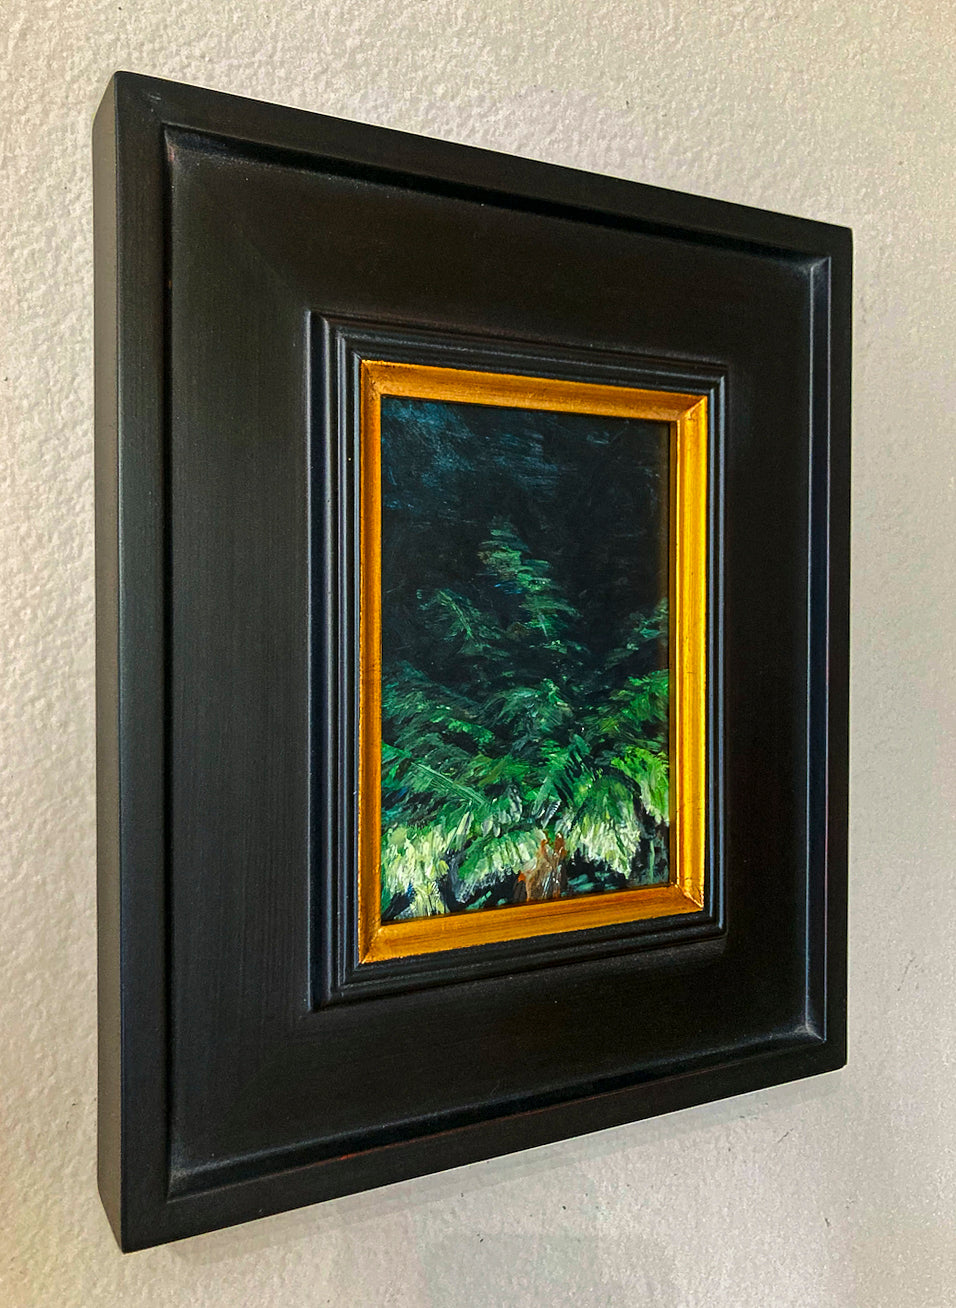 Oil painting of top of palm tree using shades of green titled 'In the Dark' by E. E. Jacks with dark wood frame and inner gold gild